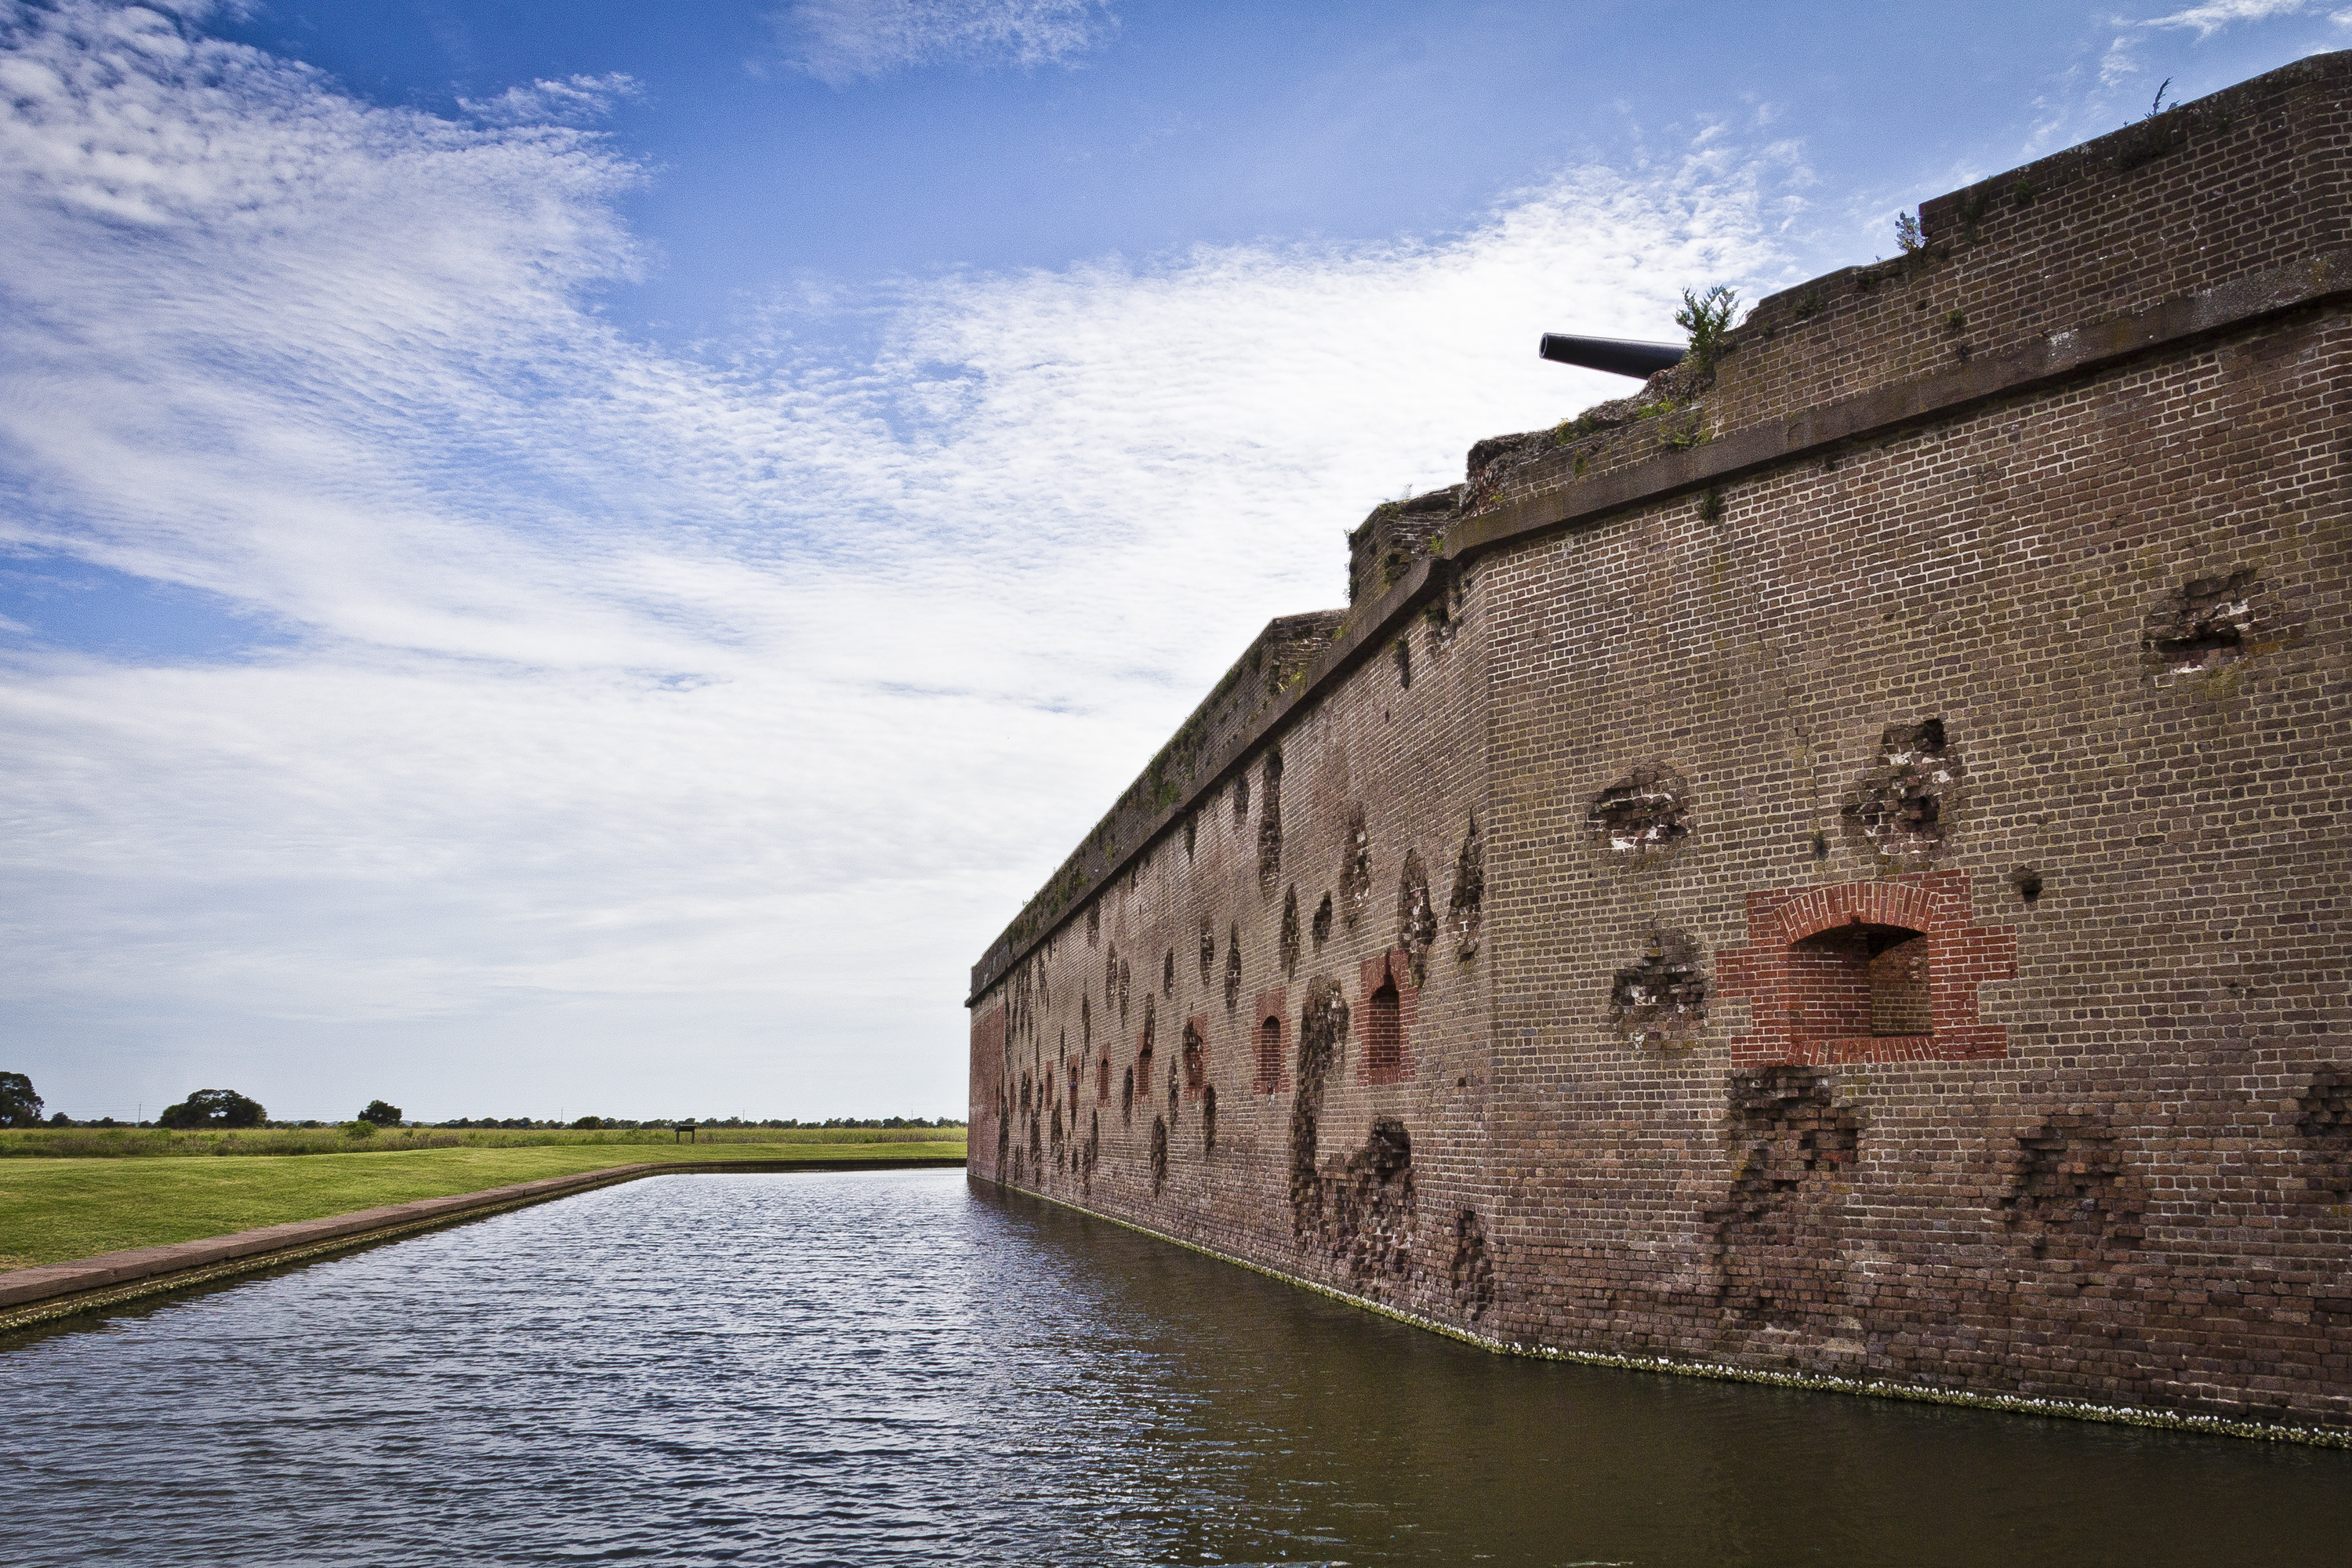 The red masonry walls of Fort Pulaski still show battle damage over 150 years later.